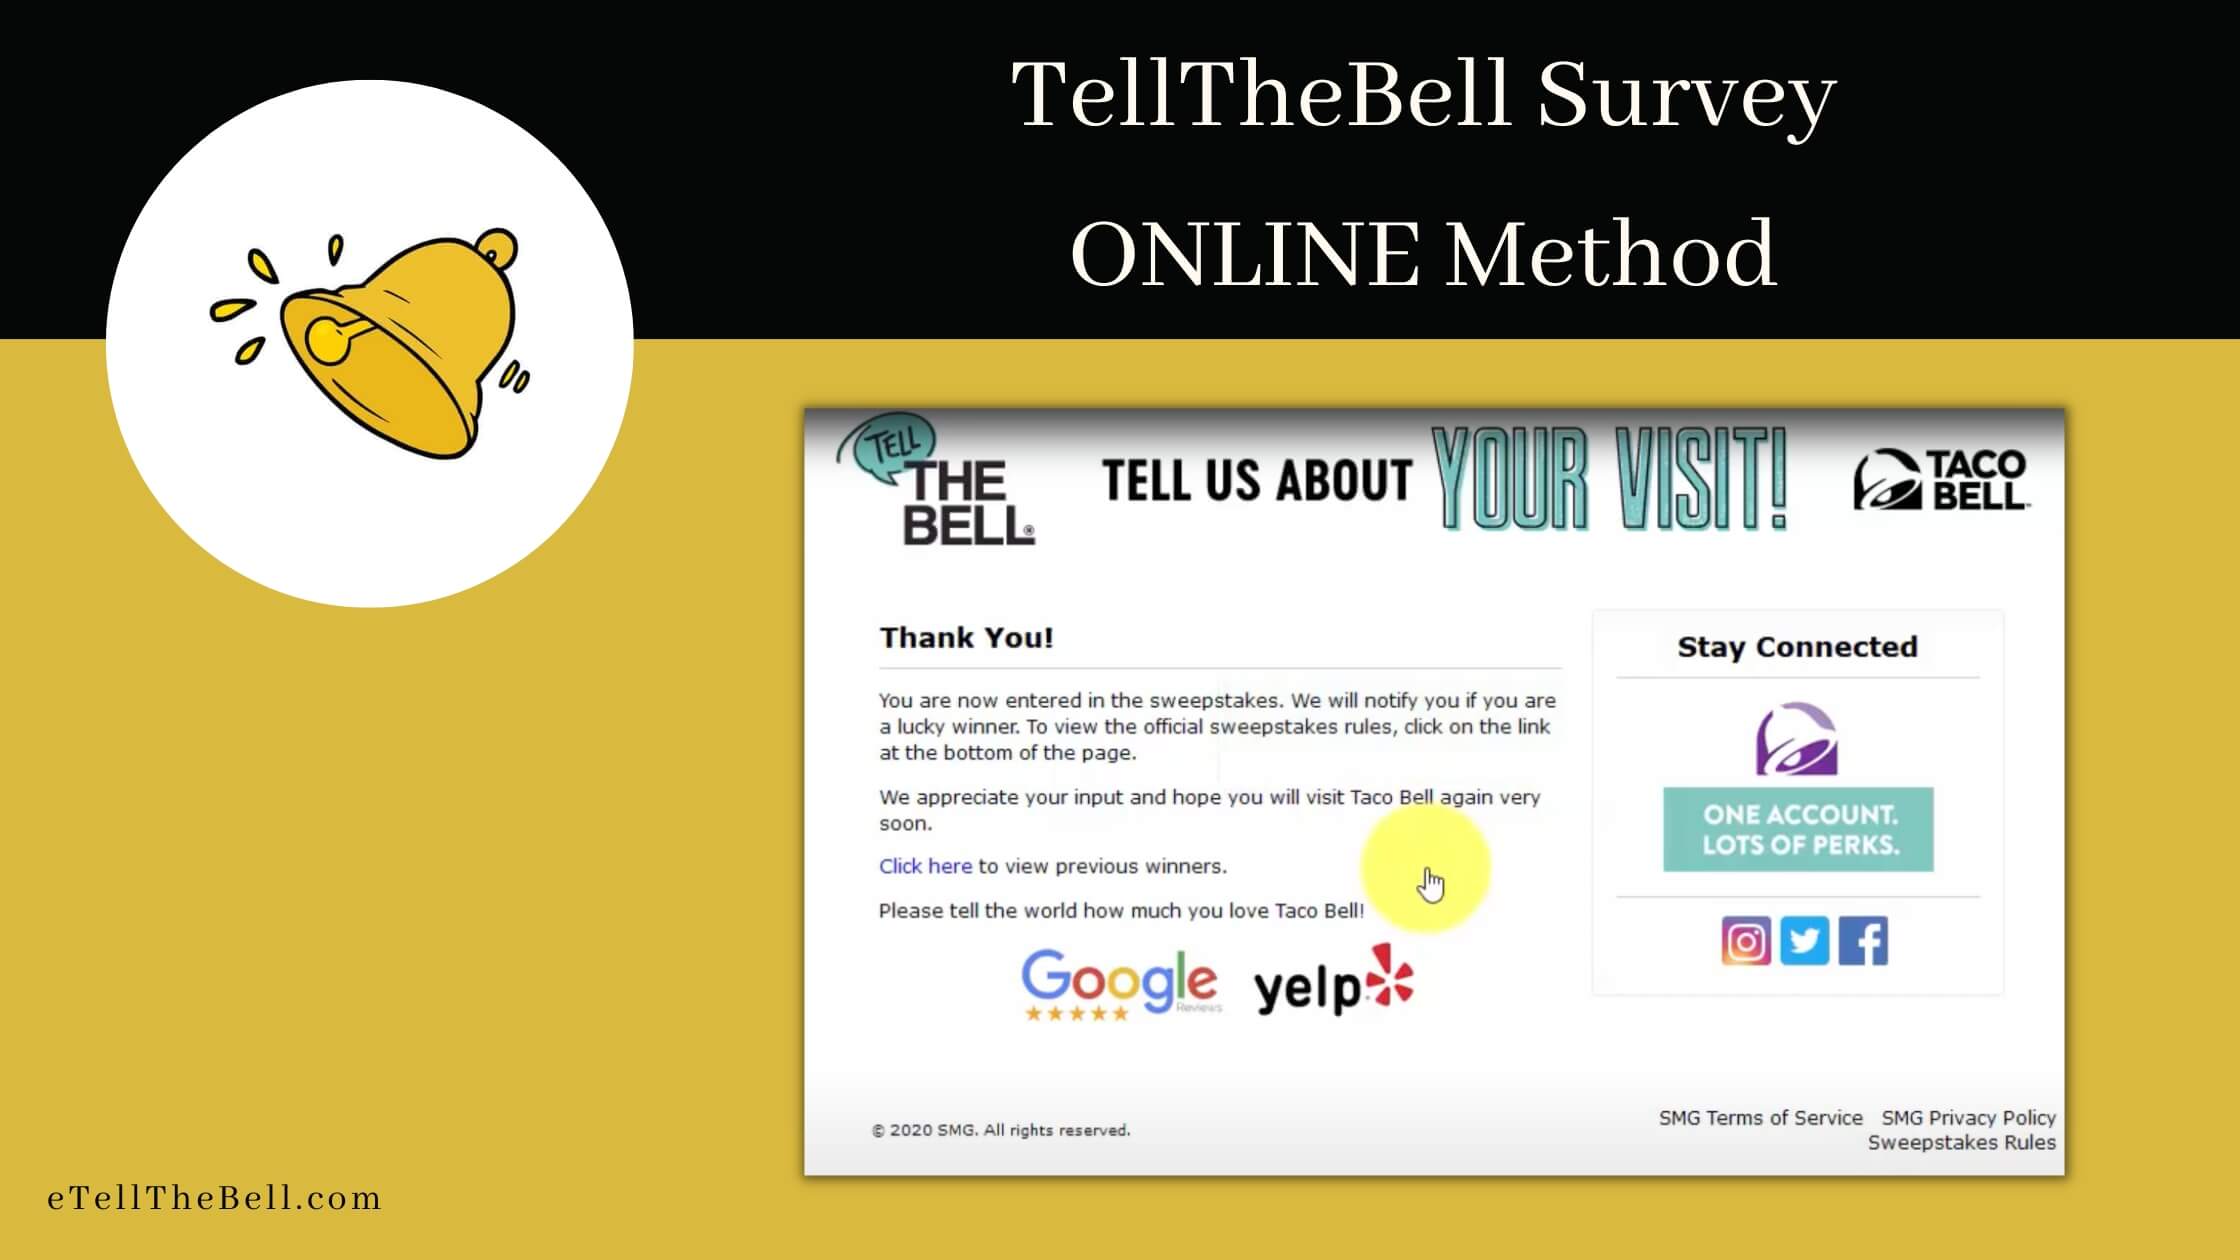 Congratulations on completing the TellTheBell Survey